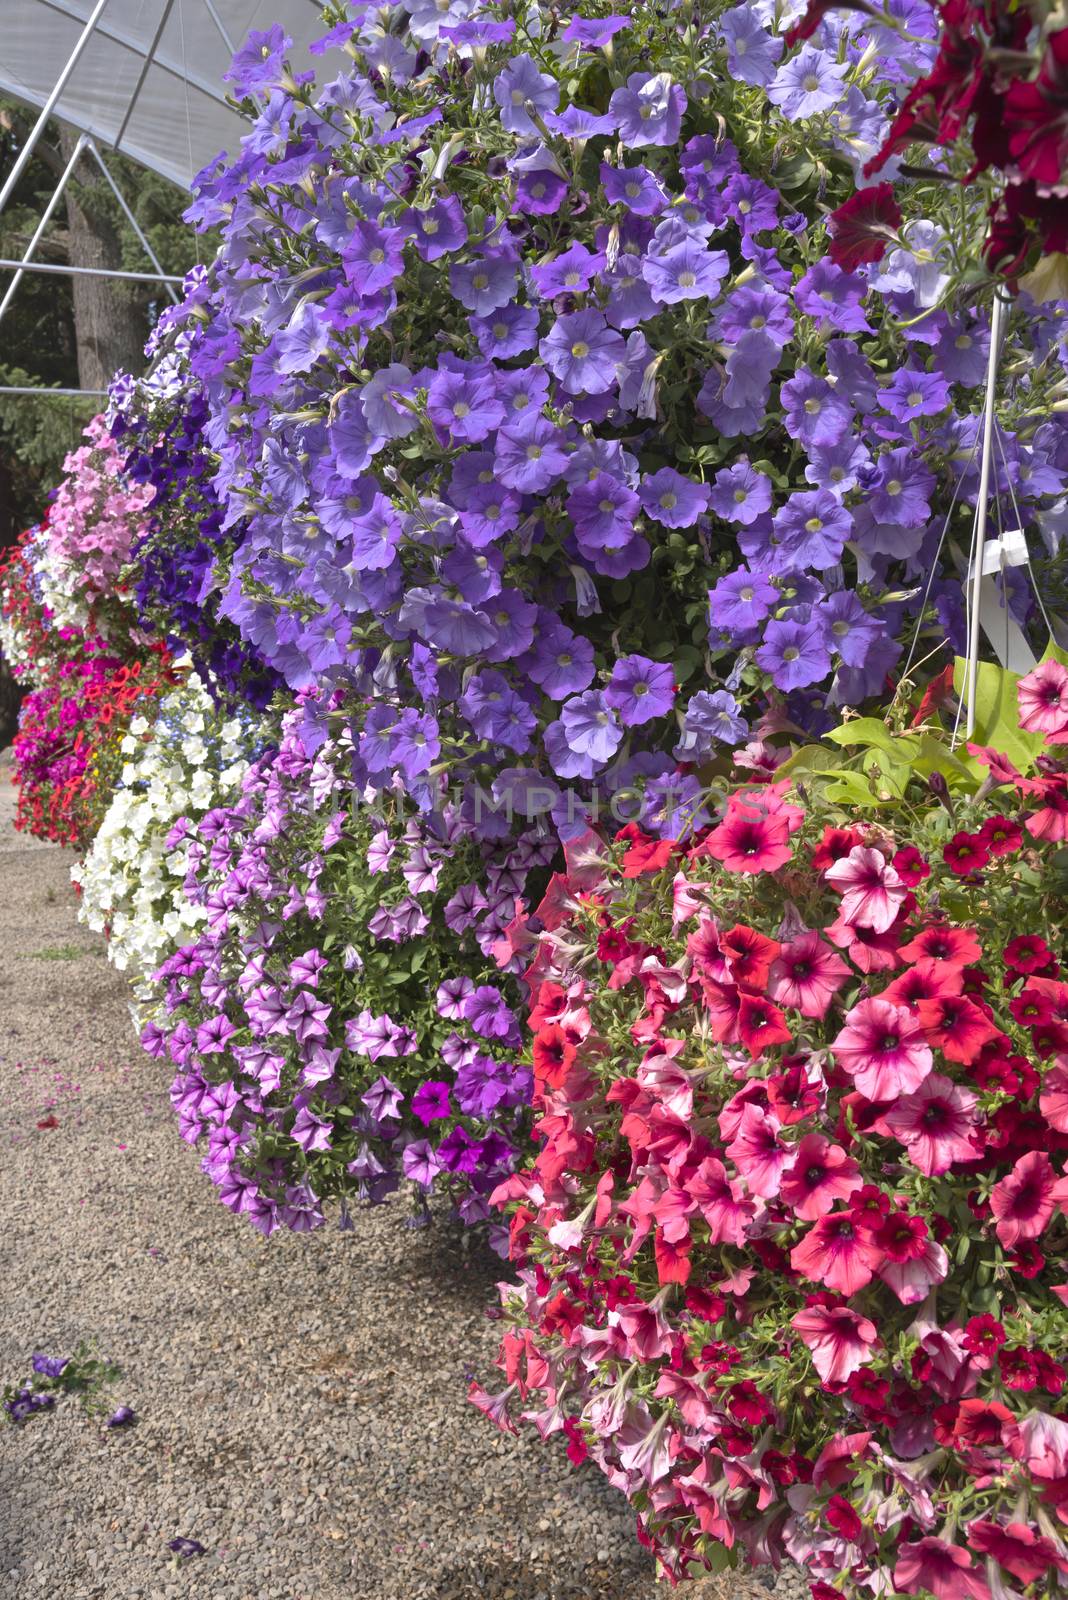 Display of Summer blooms in a farm and garden nursery Canby Oregon.